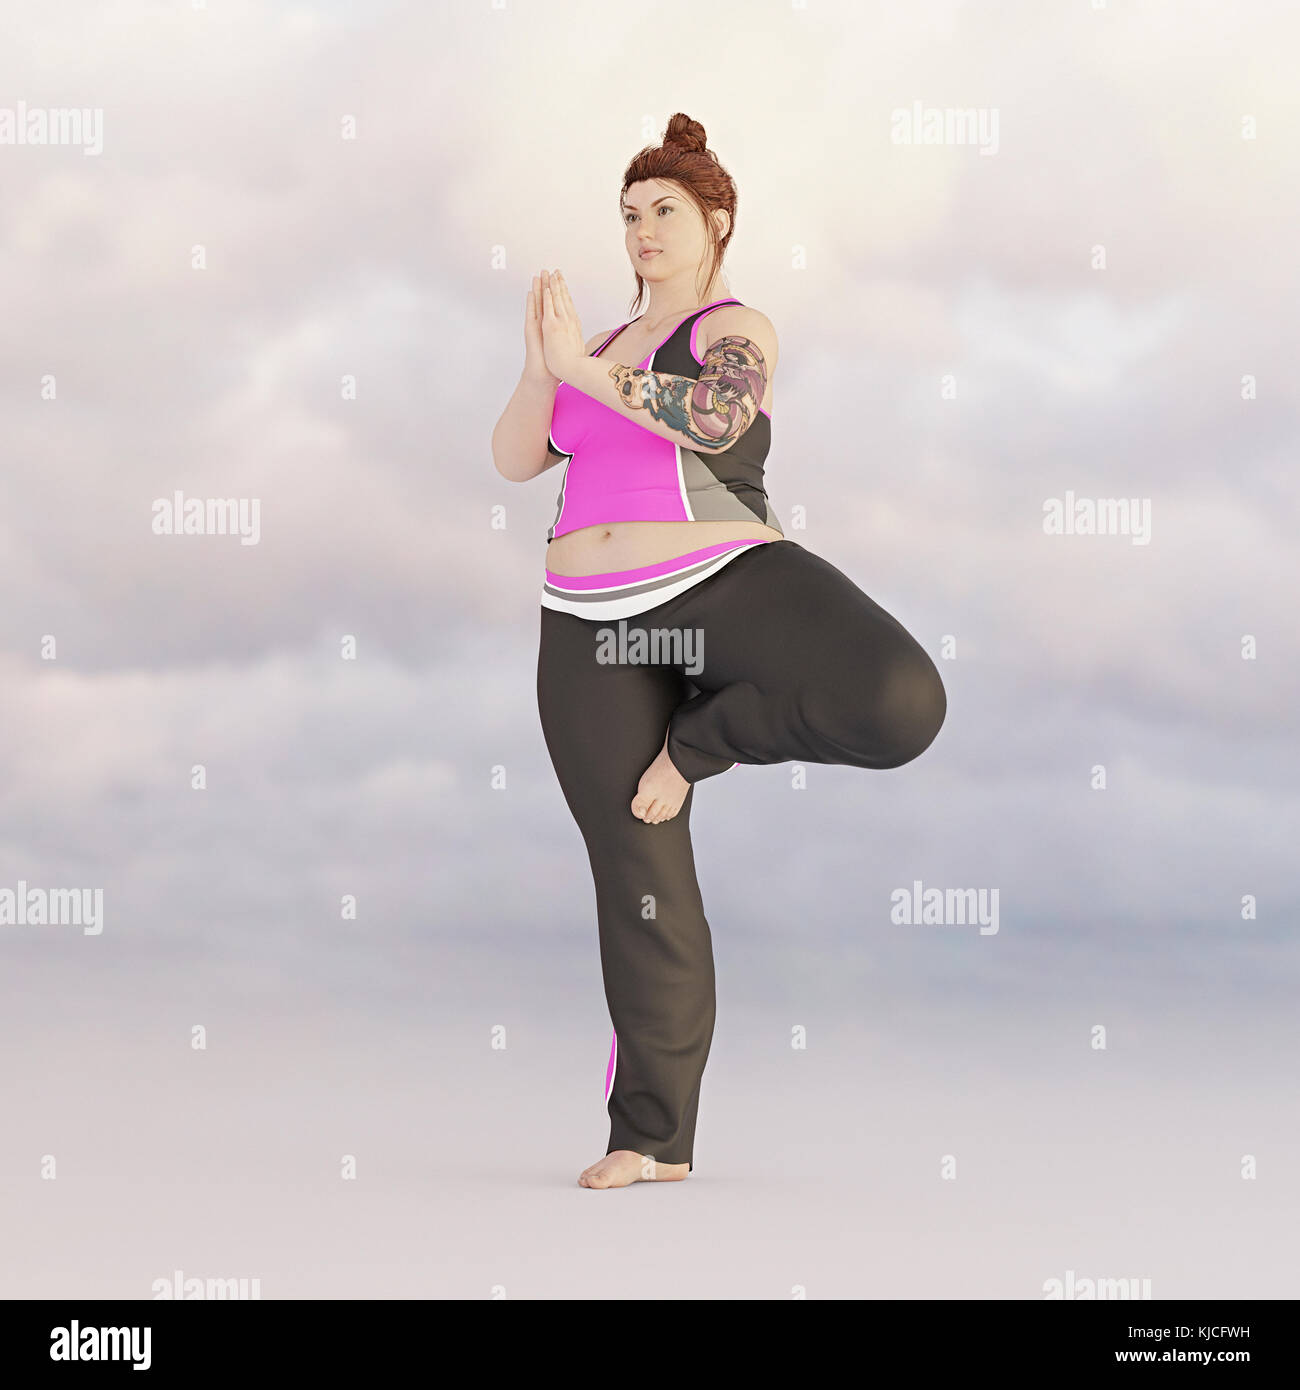 Overweight woman performing yoga in sky Stock Photo